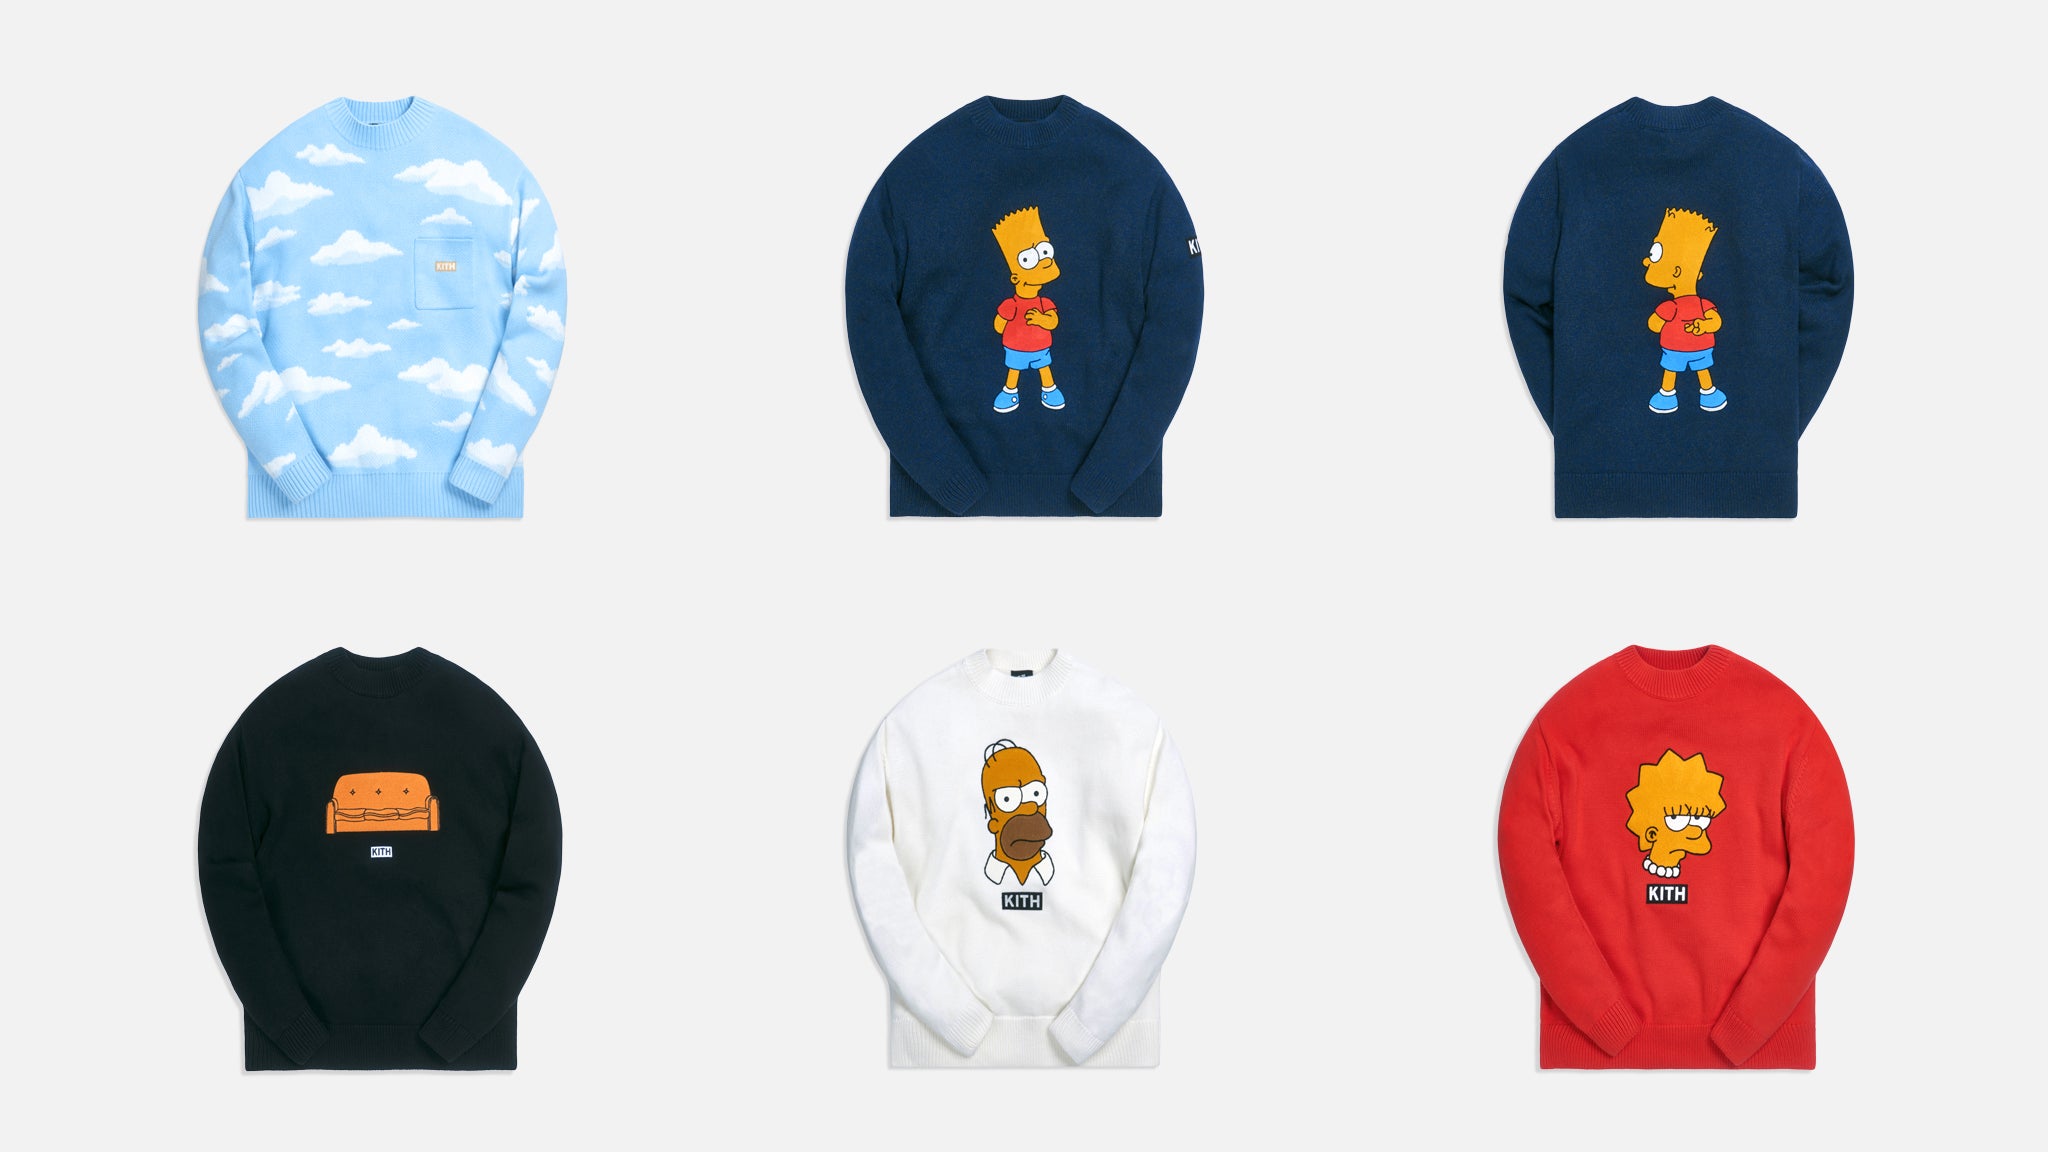 Kith x the simpsons intarsia sweater Blue - $186 - From Laurie